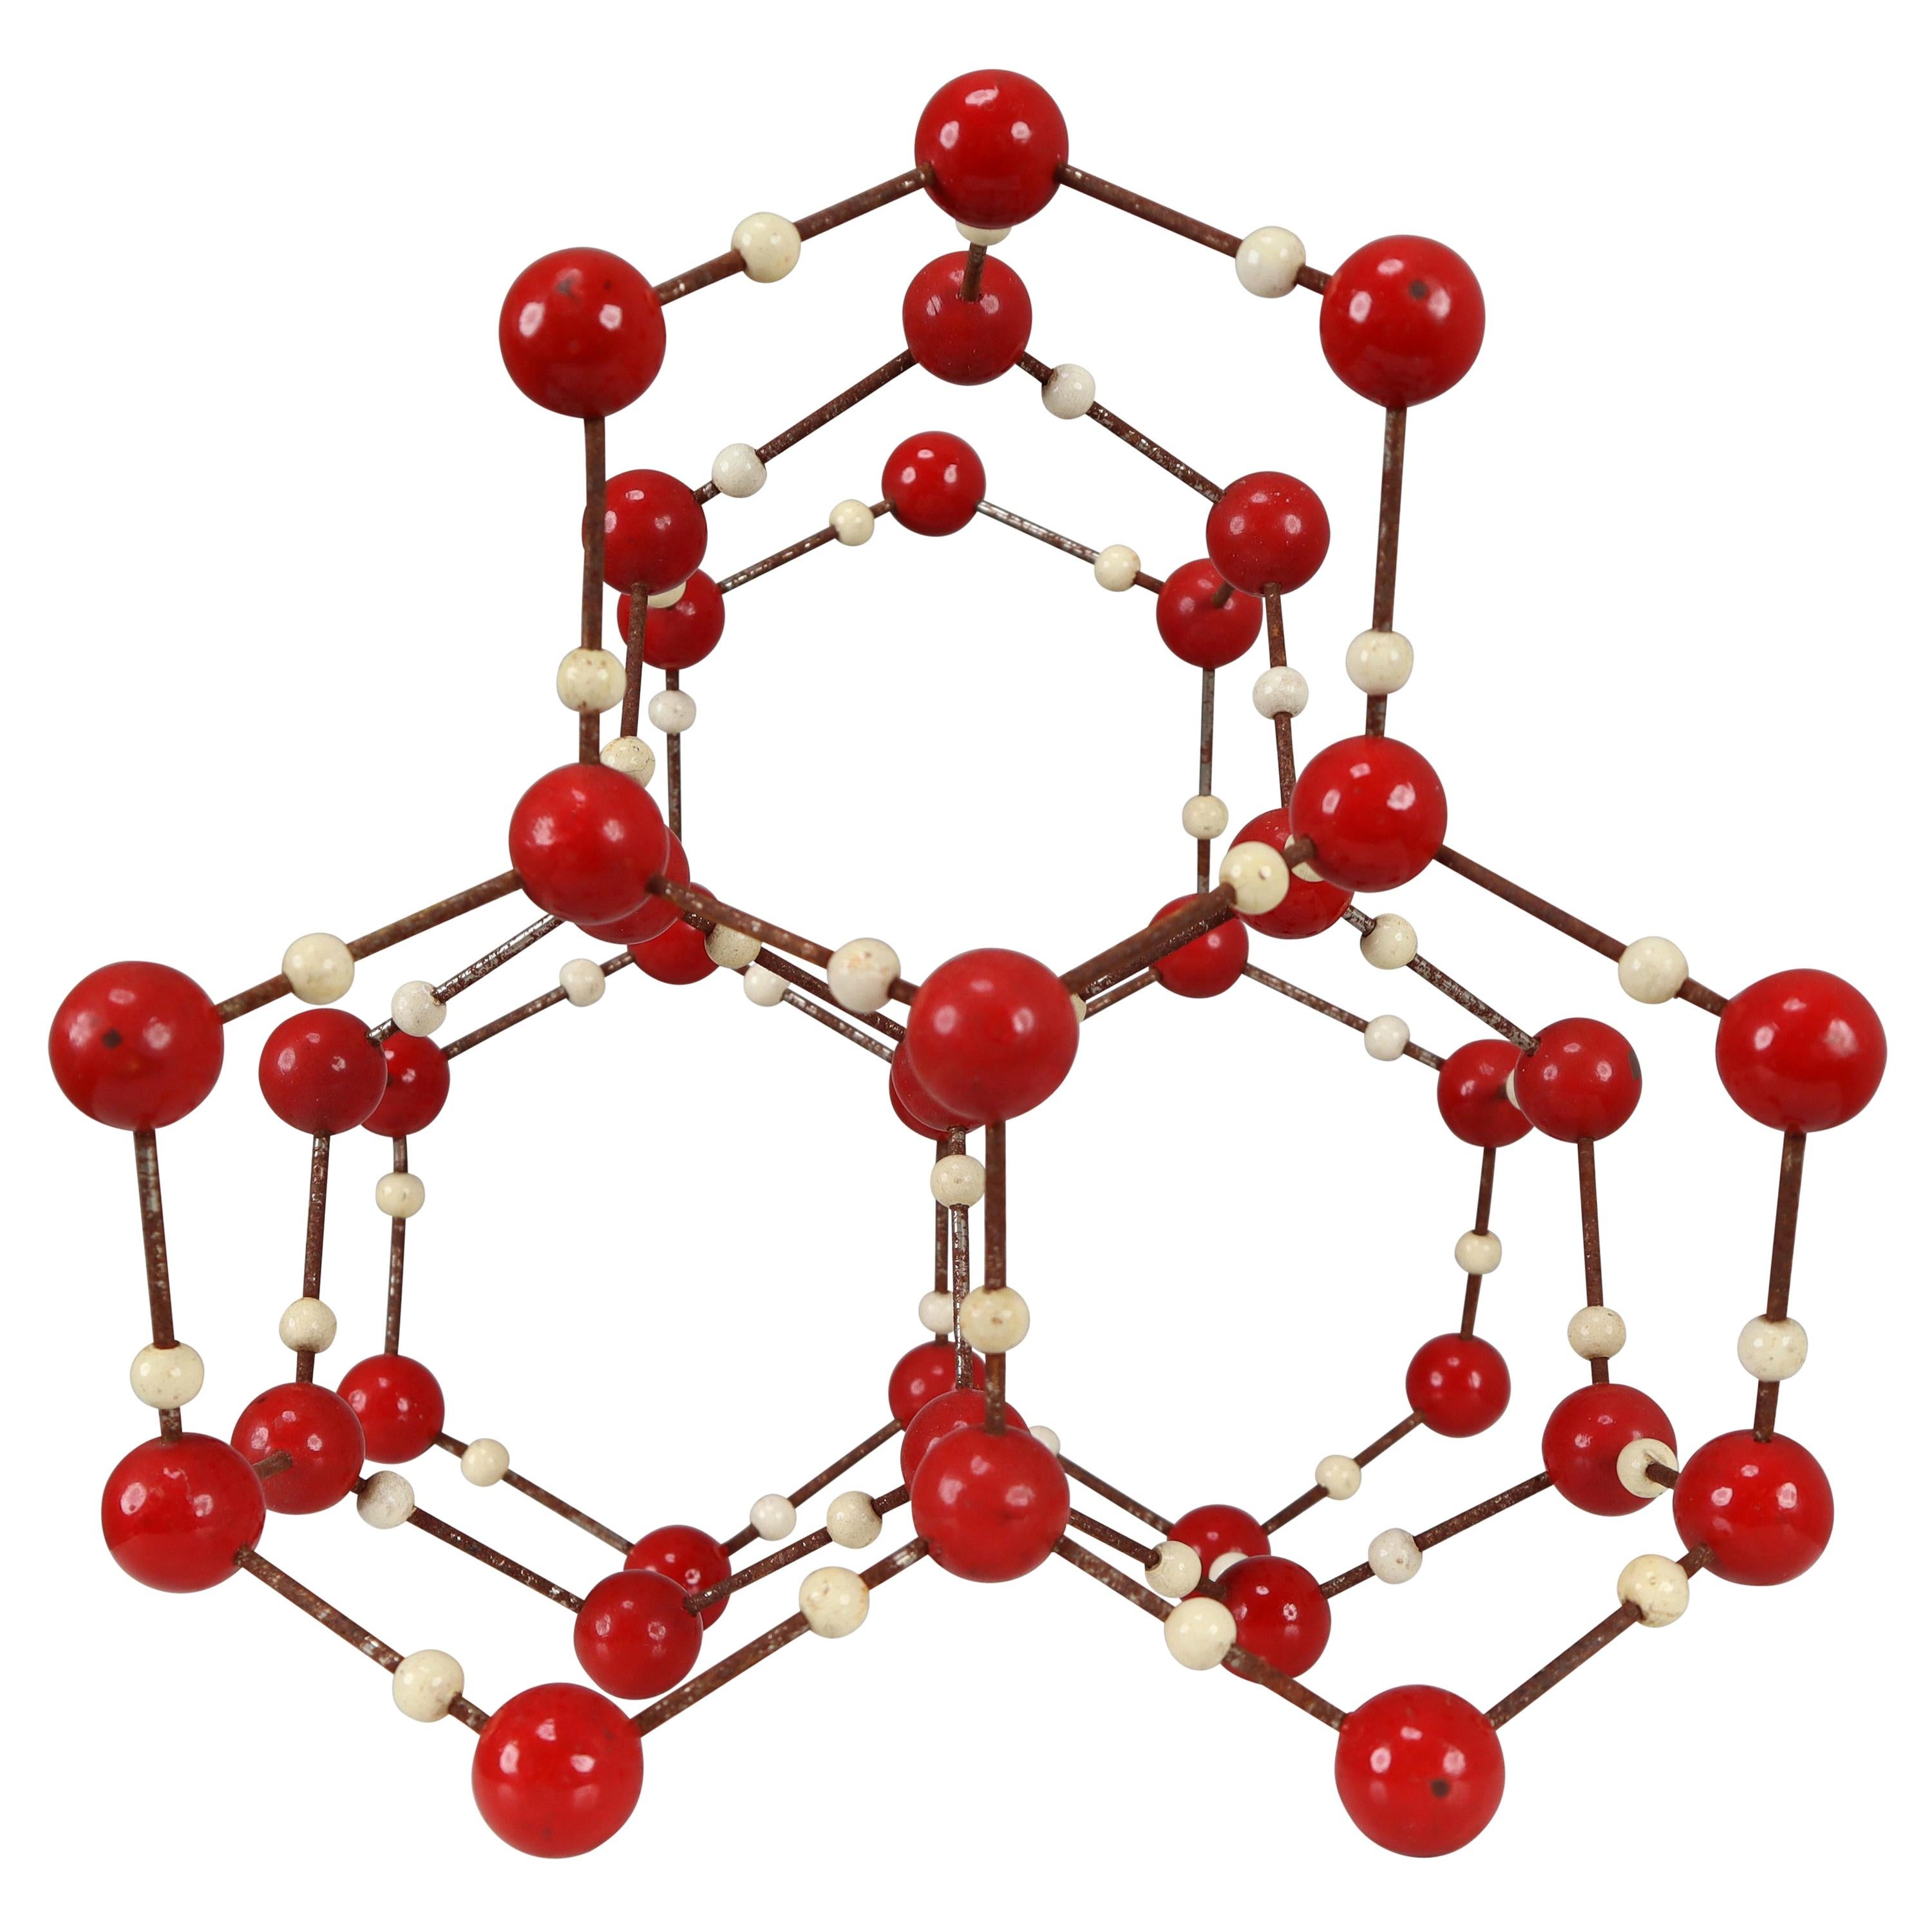 Midcentury Molecular Structure for Didactic Purposes Made in the 1950s